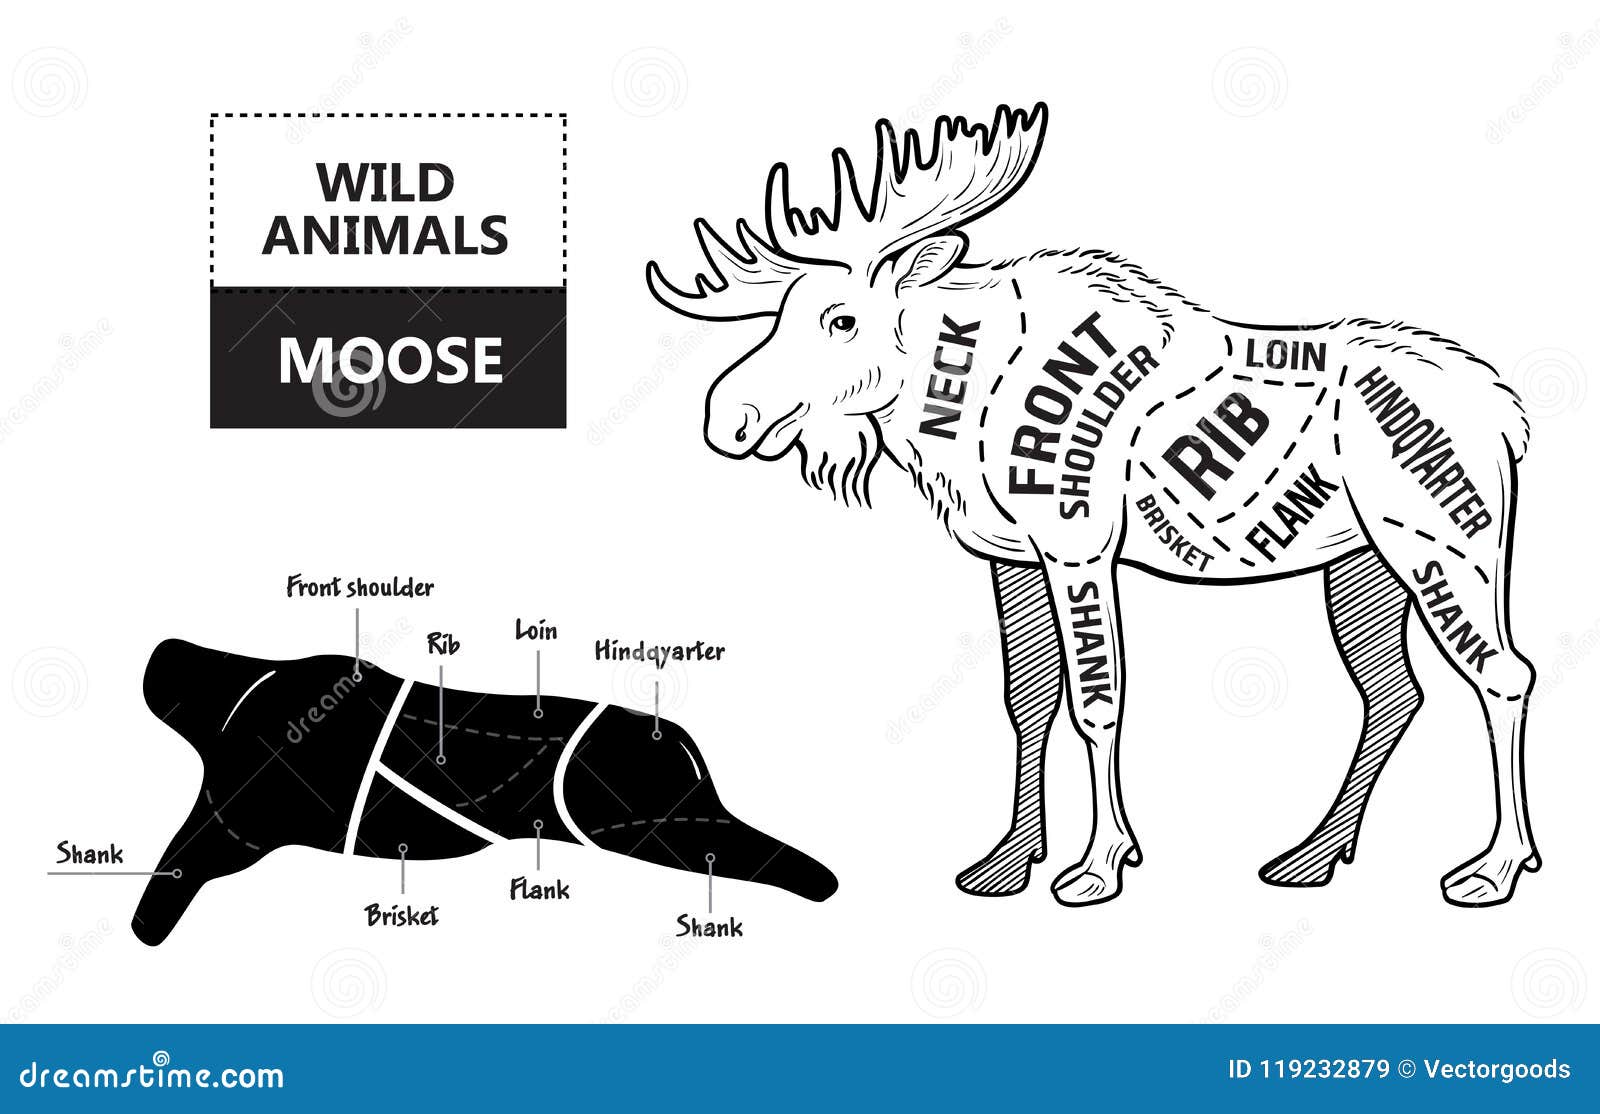 How big is a moose's penis